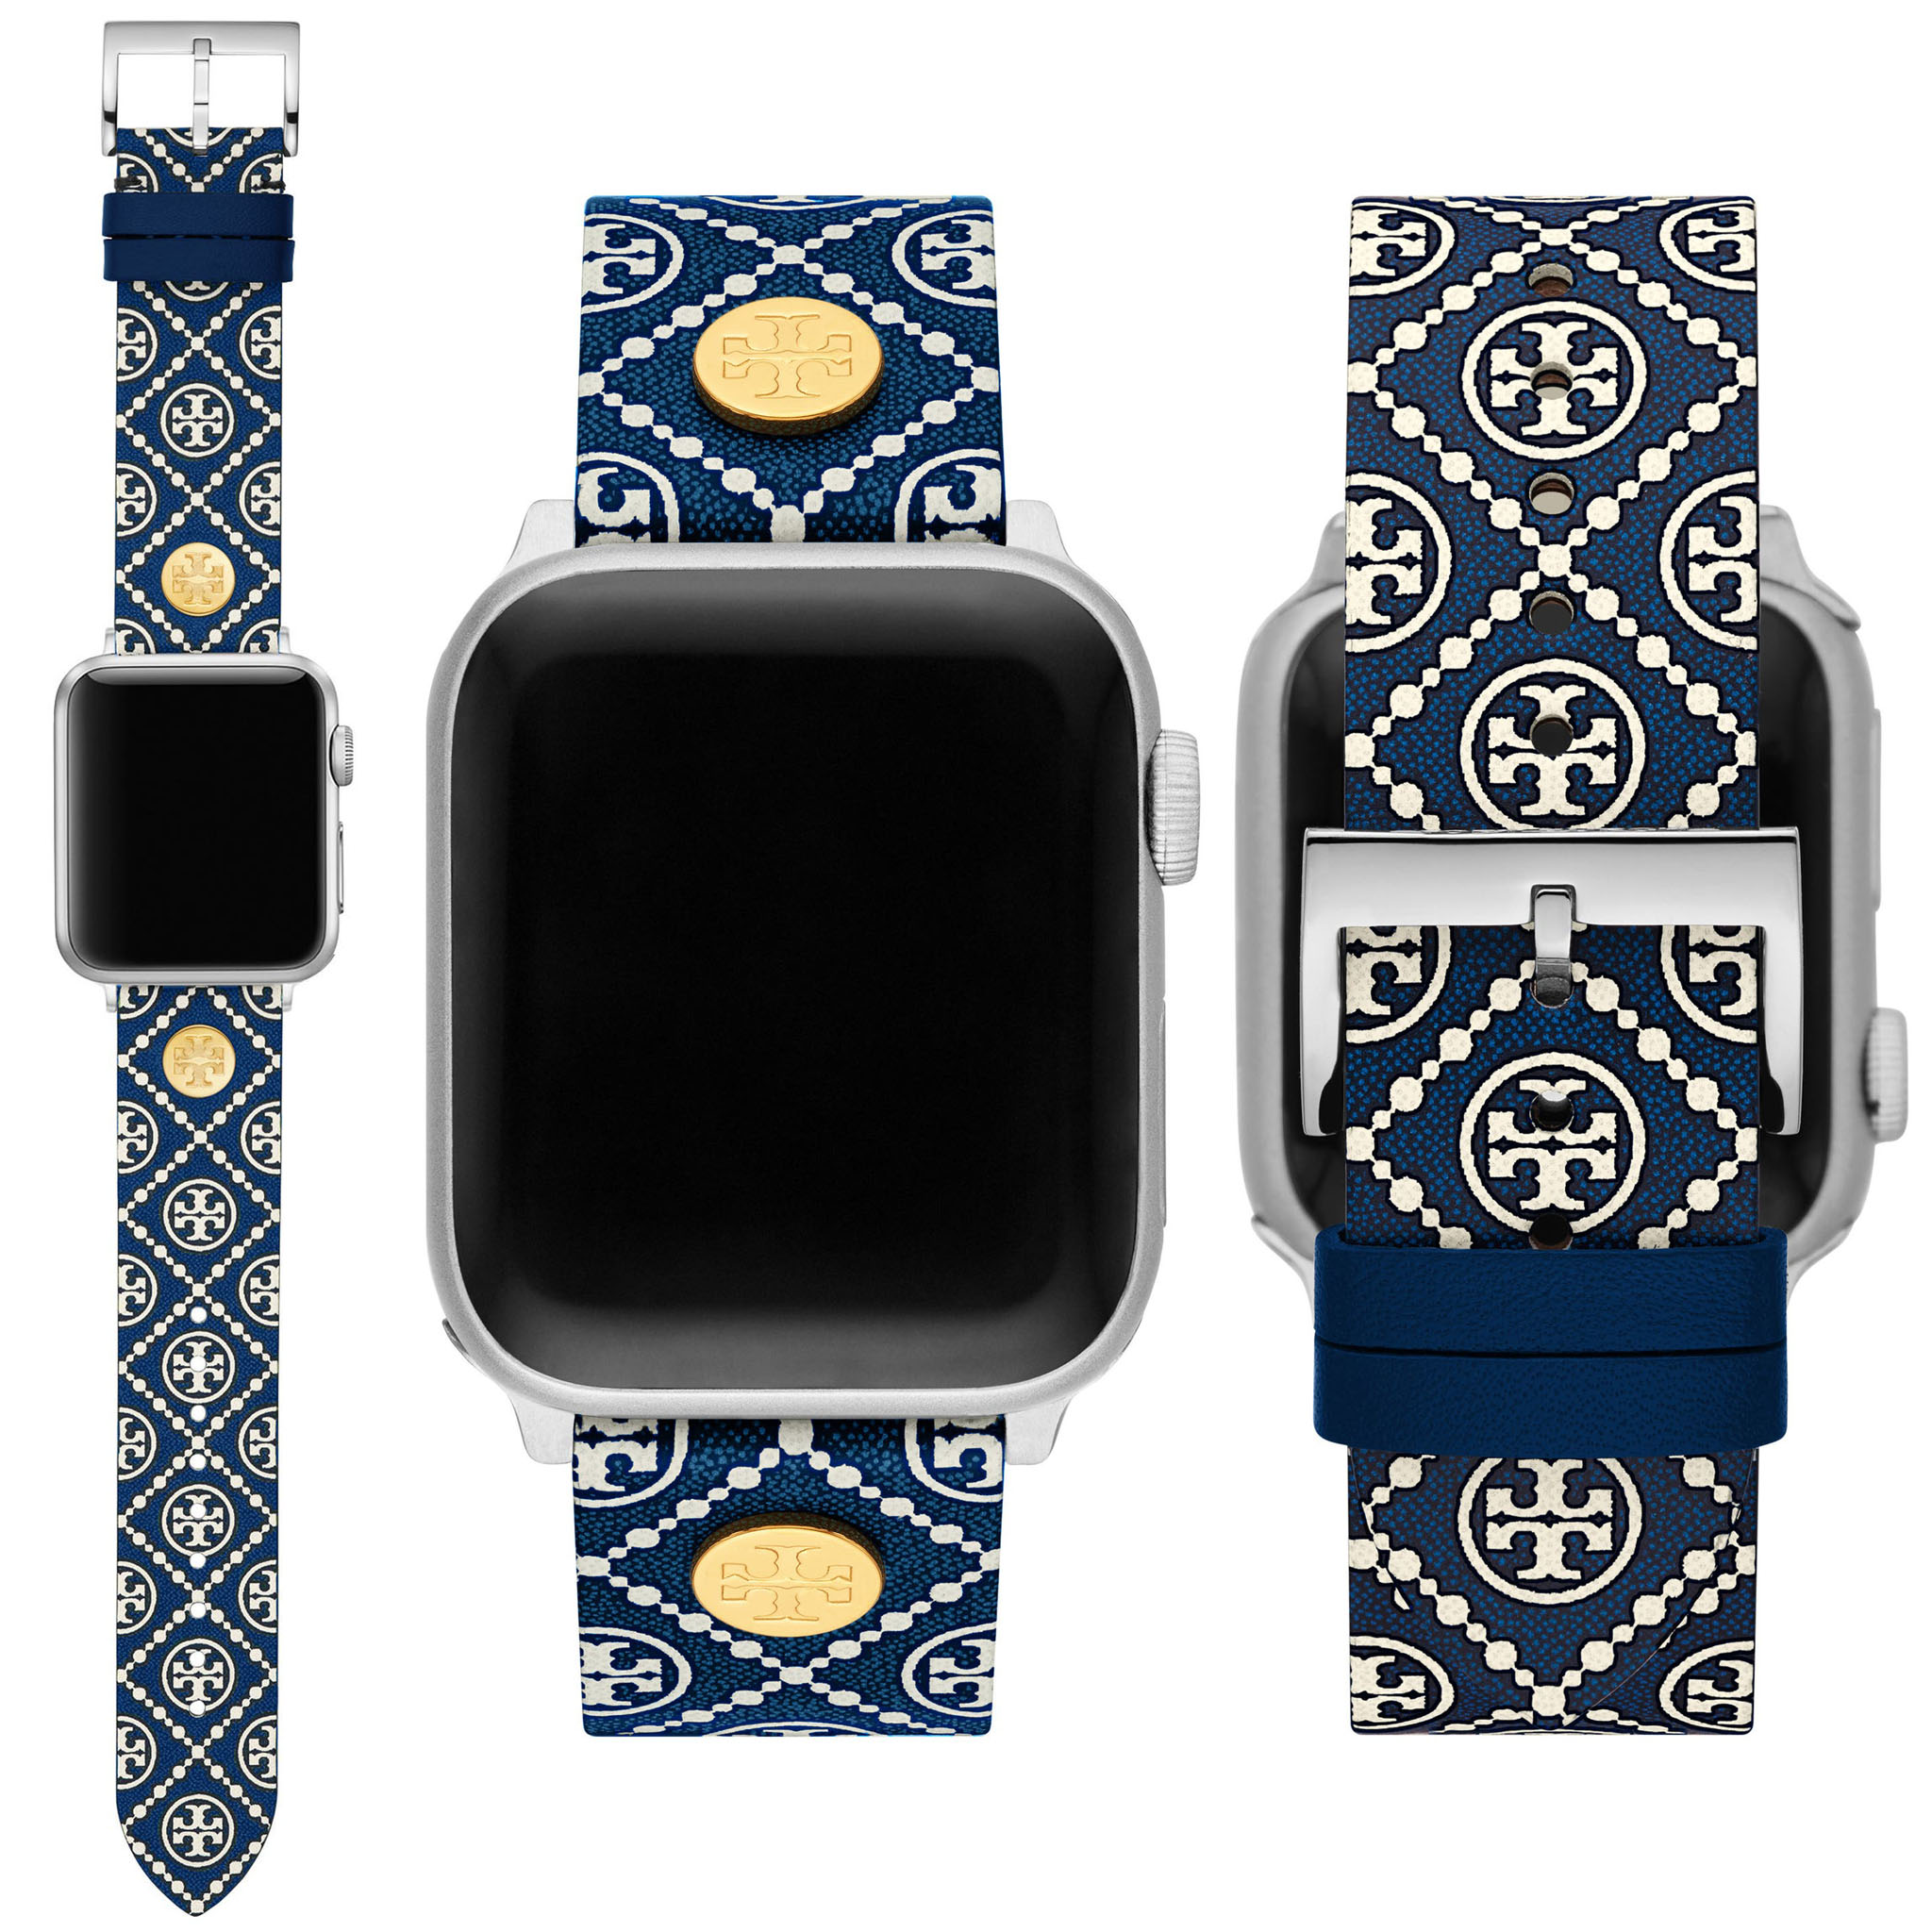 A striking Apple Watch strap, Tory Burch's The Monogram band is made of leather patterned with the signature double-T logo and accented with gleaming gold-tone medallions